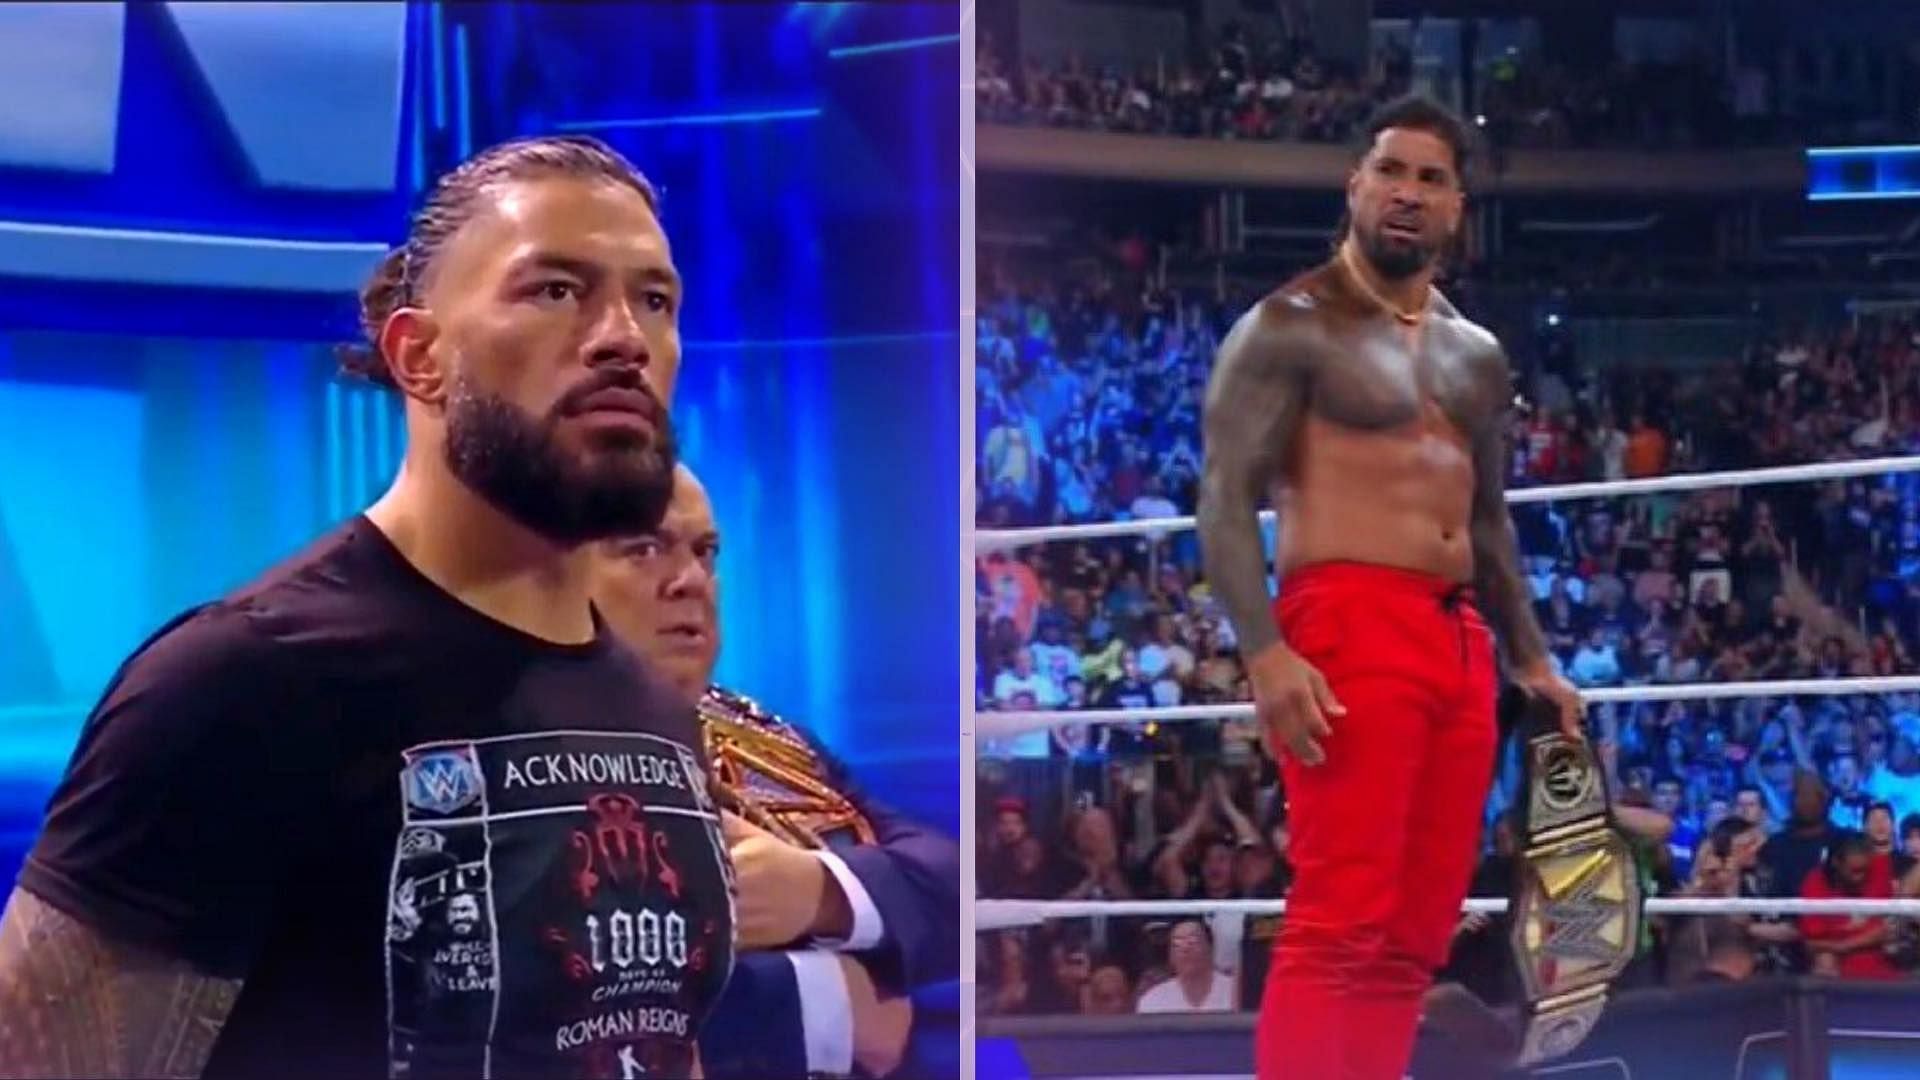 Roman Reigns was challenged to a big-time bout by Jey Uso on WWE SmackDown